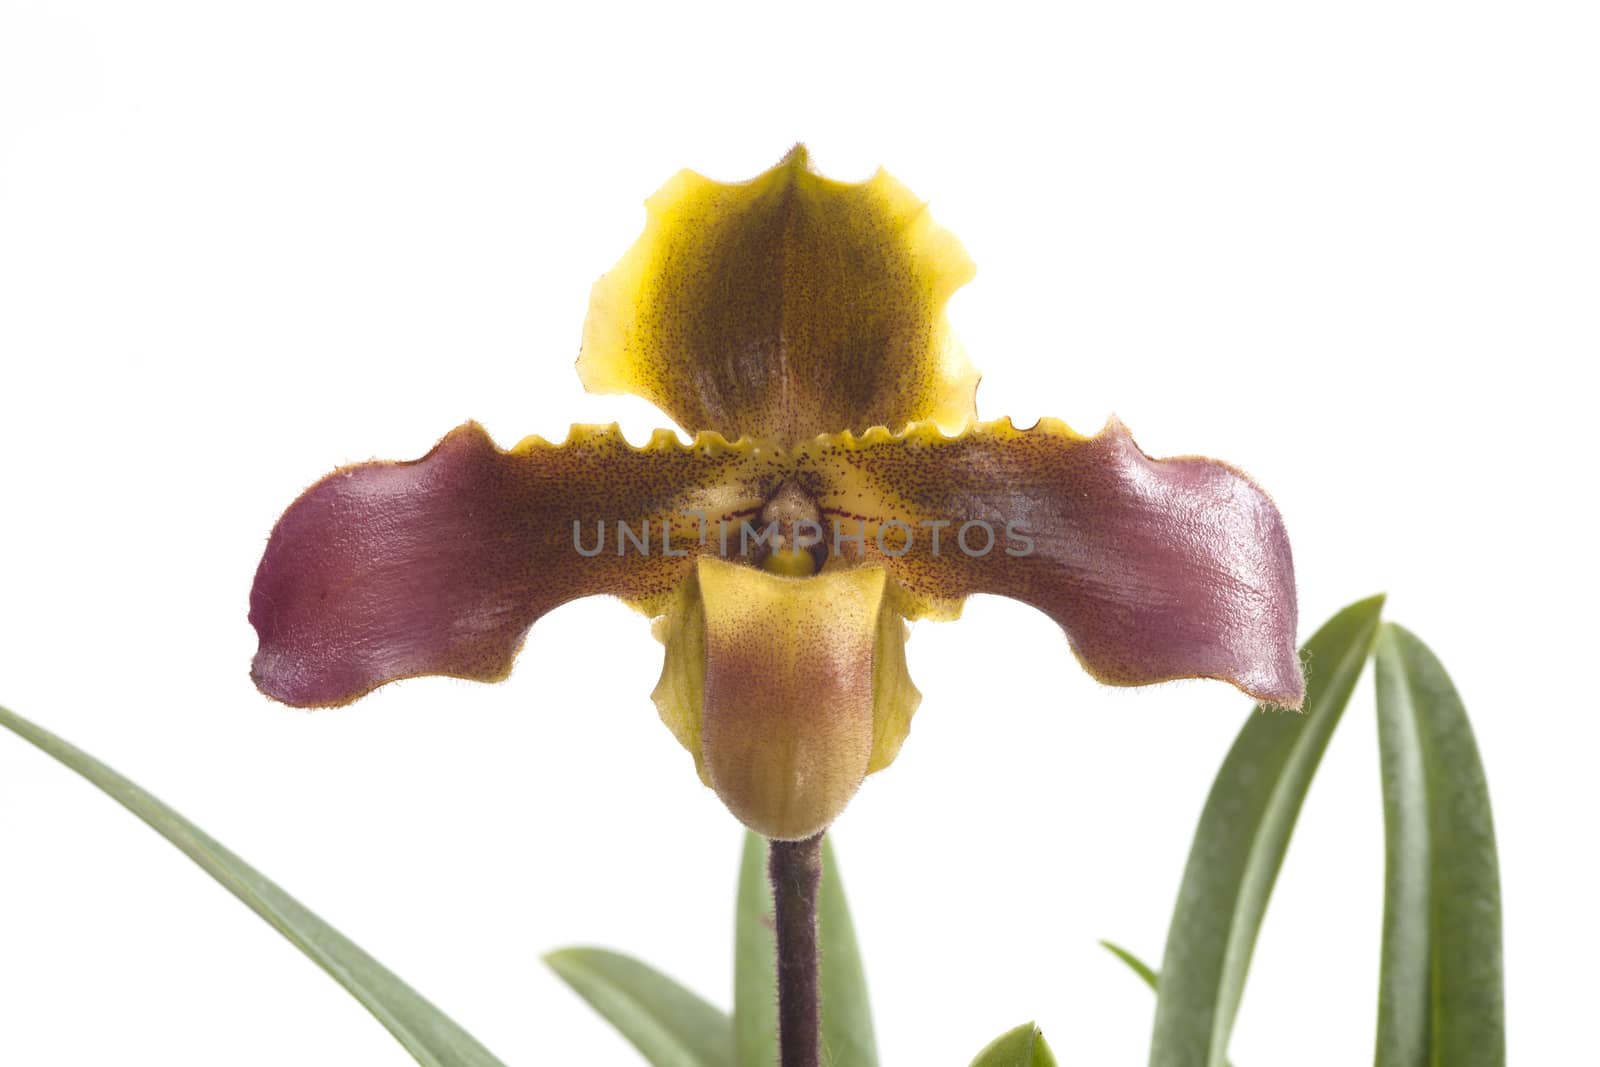 Paphiopedilum hirsutissimum is a species of orchid ranging from Assam to southern China.